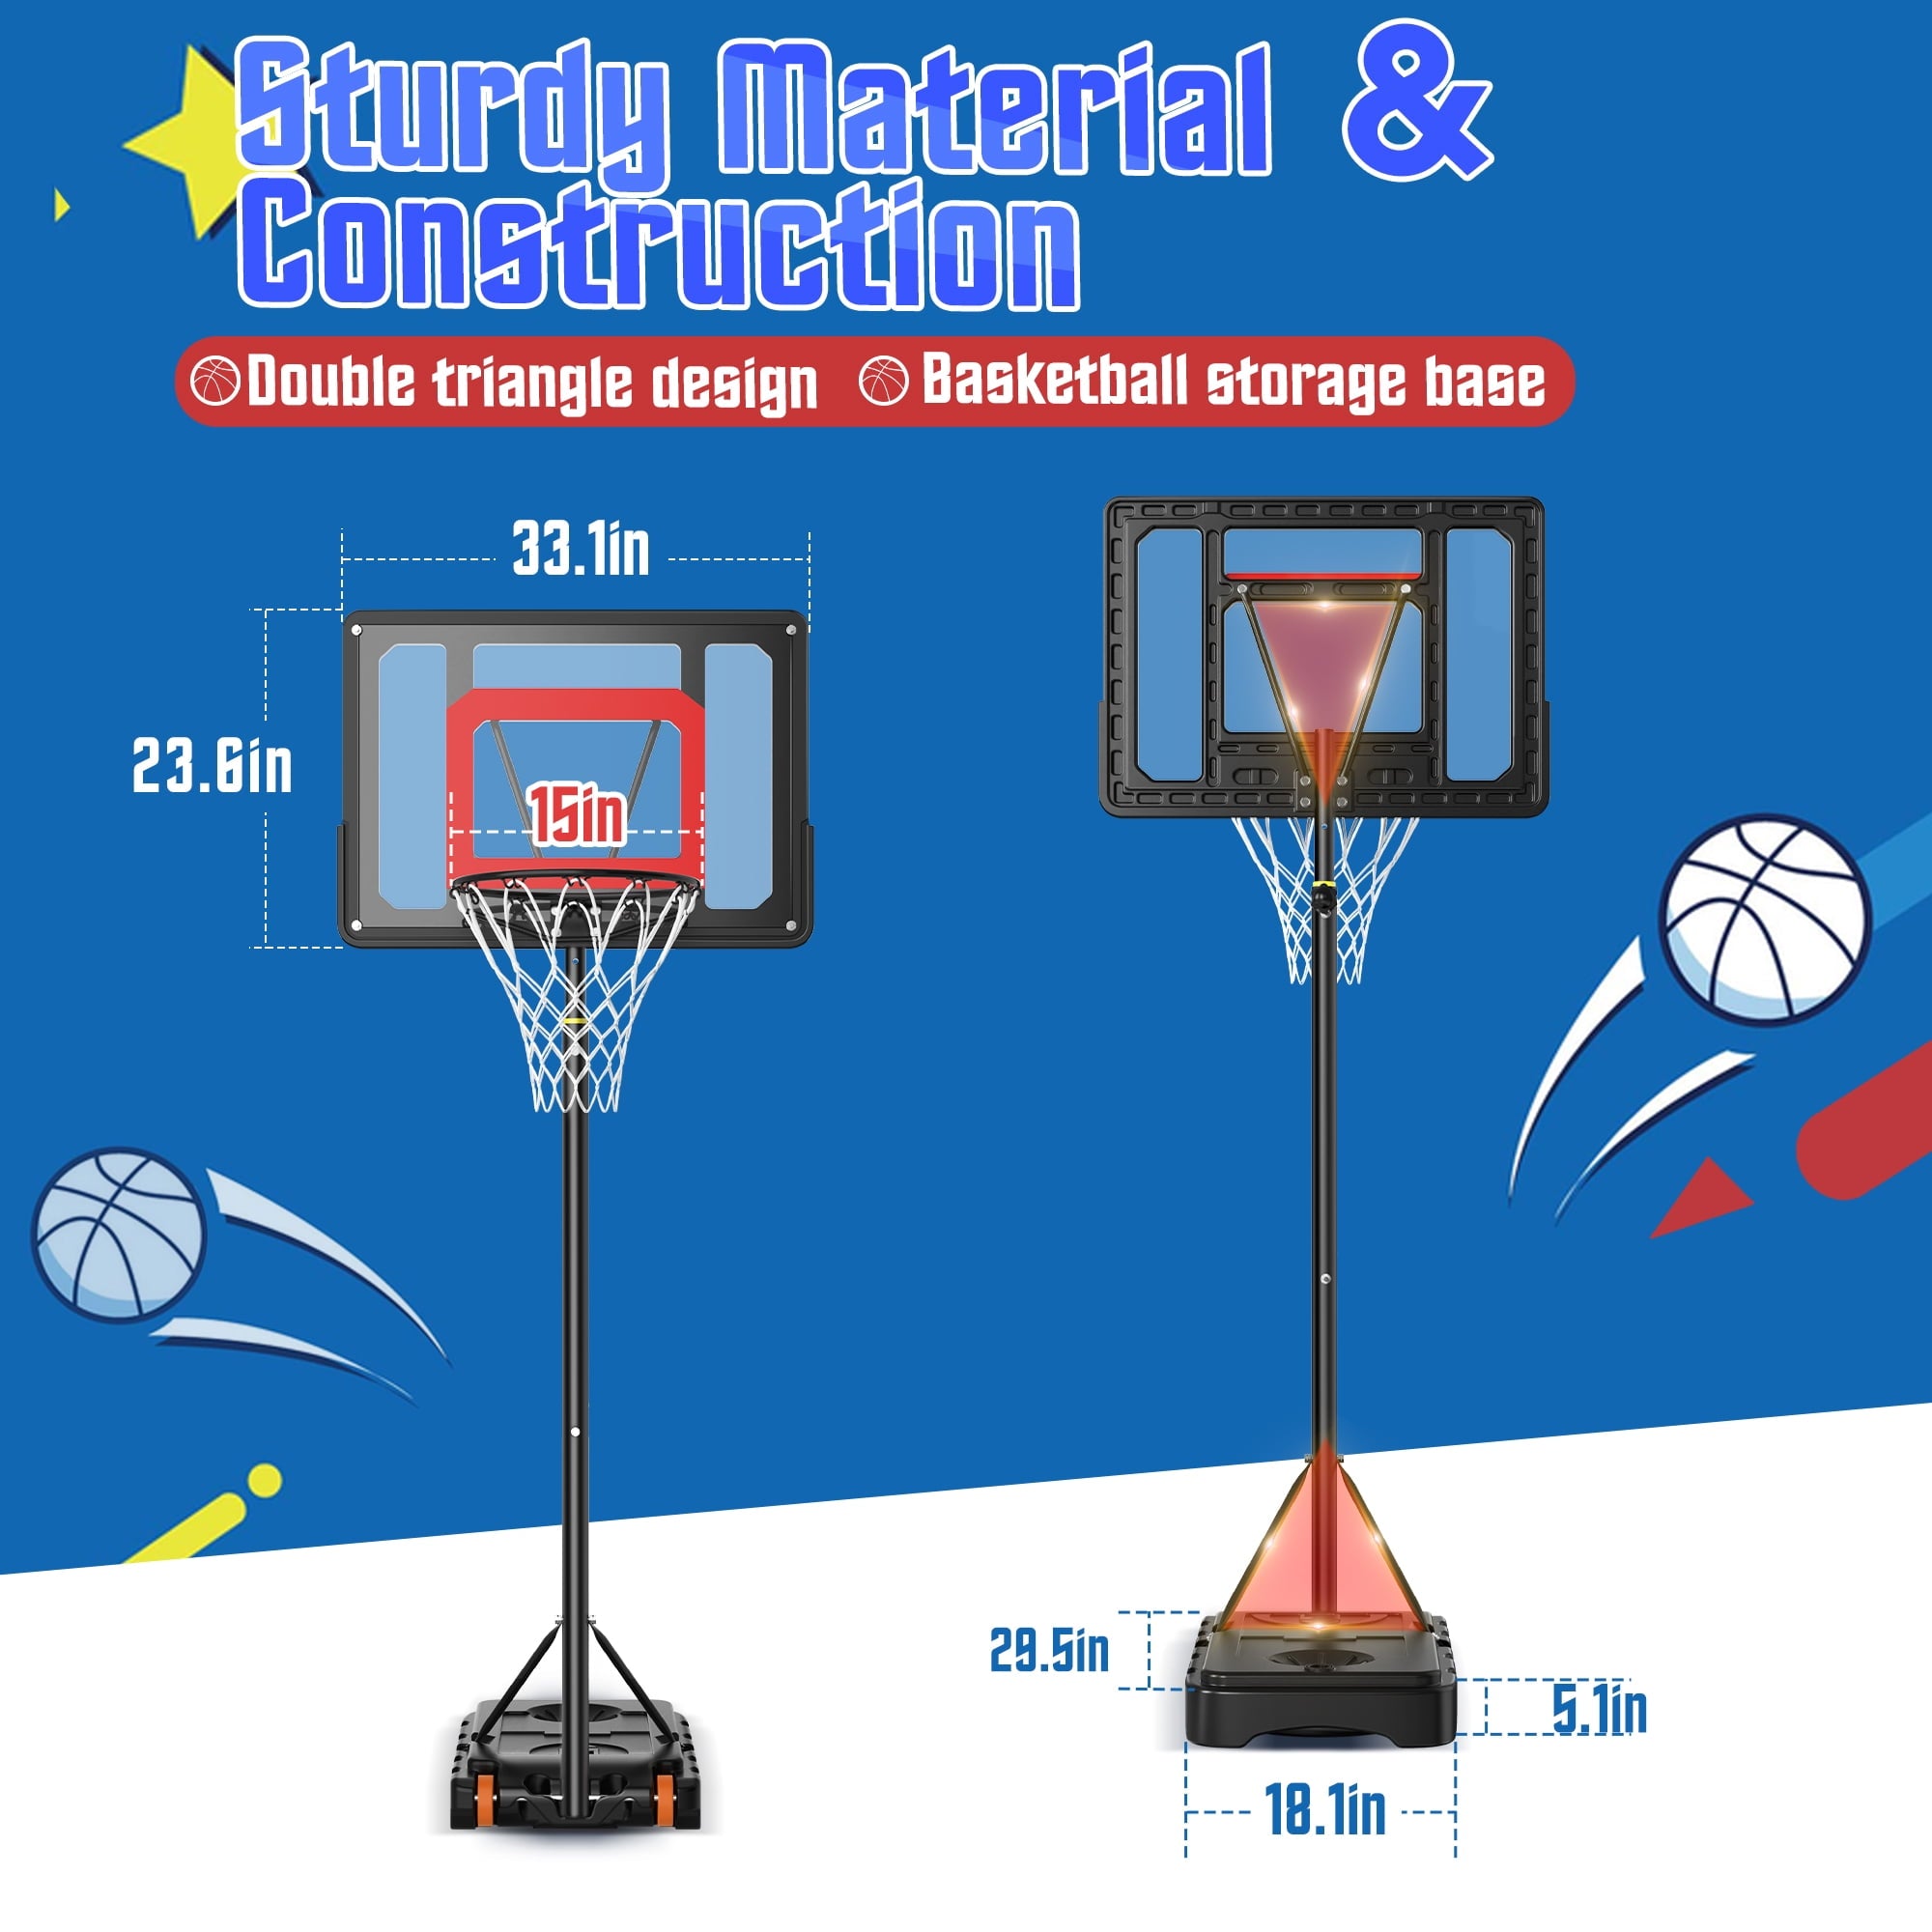 iFanze Basketball Hoop with 5ft-7ft Height Adjustable , Portable Basketball Goal System with 33" Shatterproof Backboard Base and Wheels for Kids, Indoor Outdoor, Black